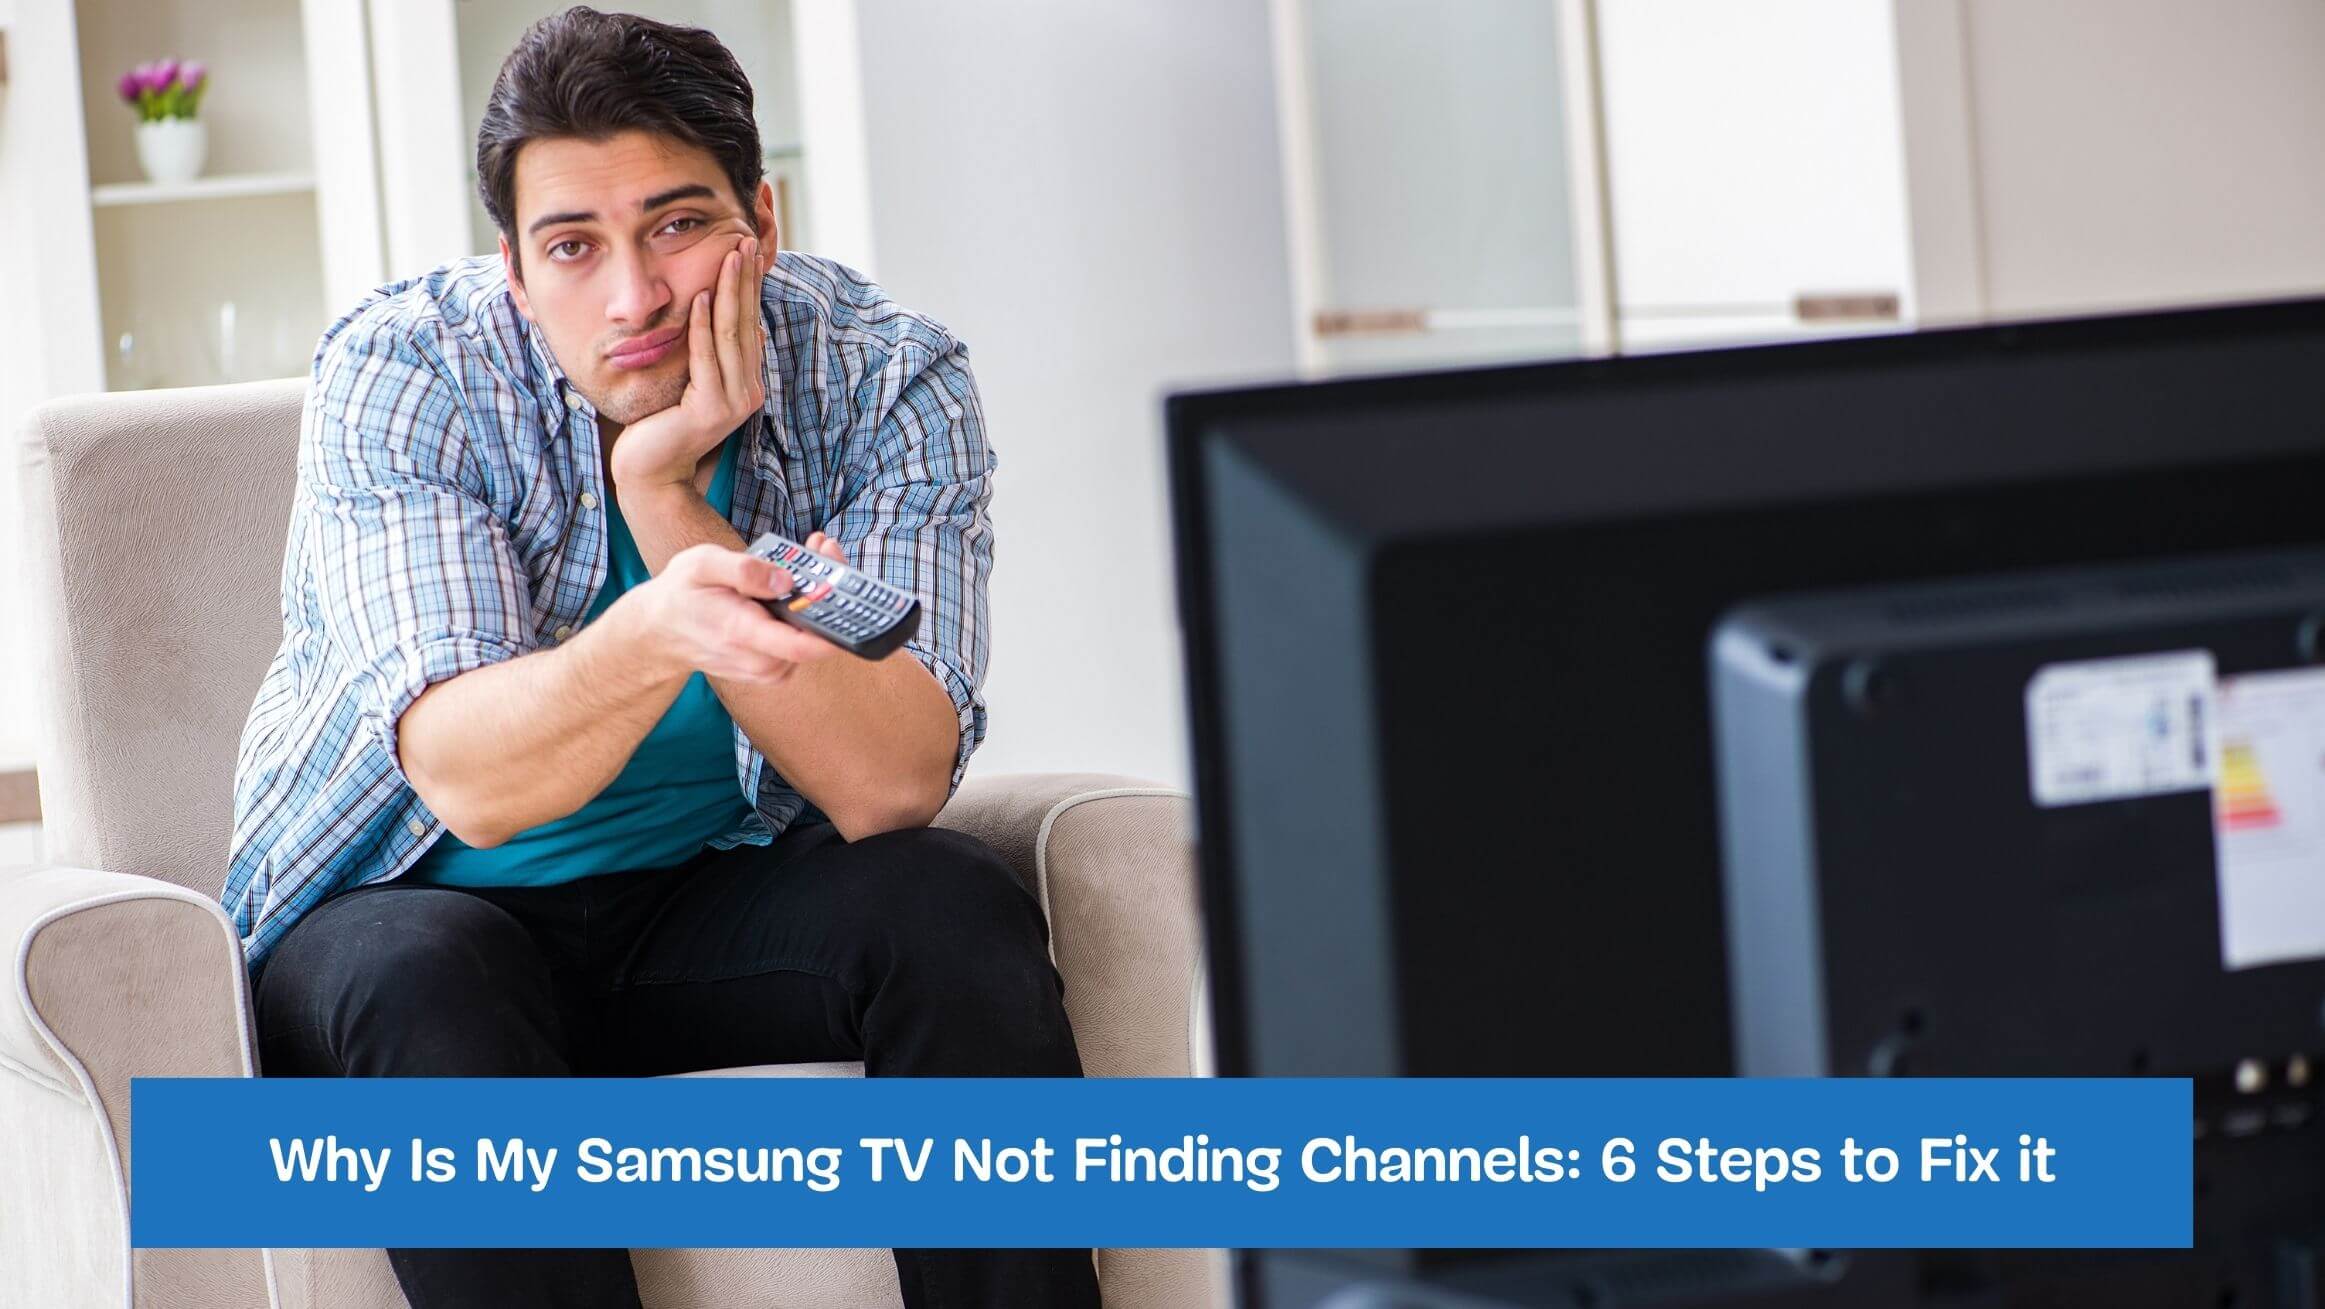 Why Is My Samsung TV Not Finding Channels: 6 Steps to Fix it